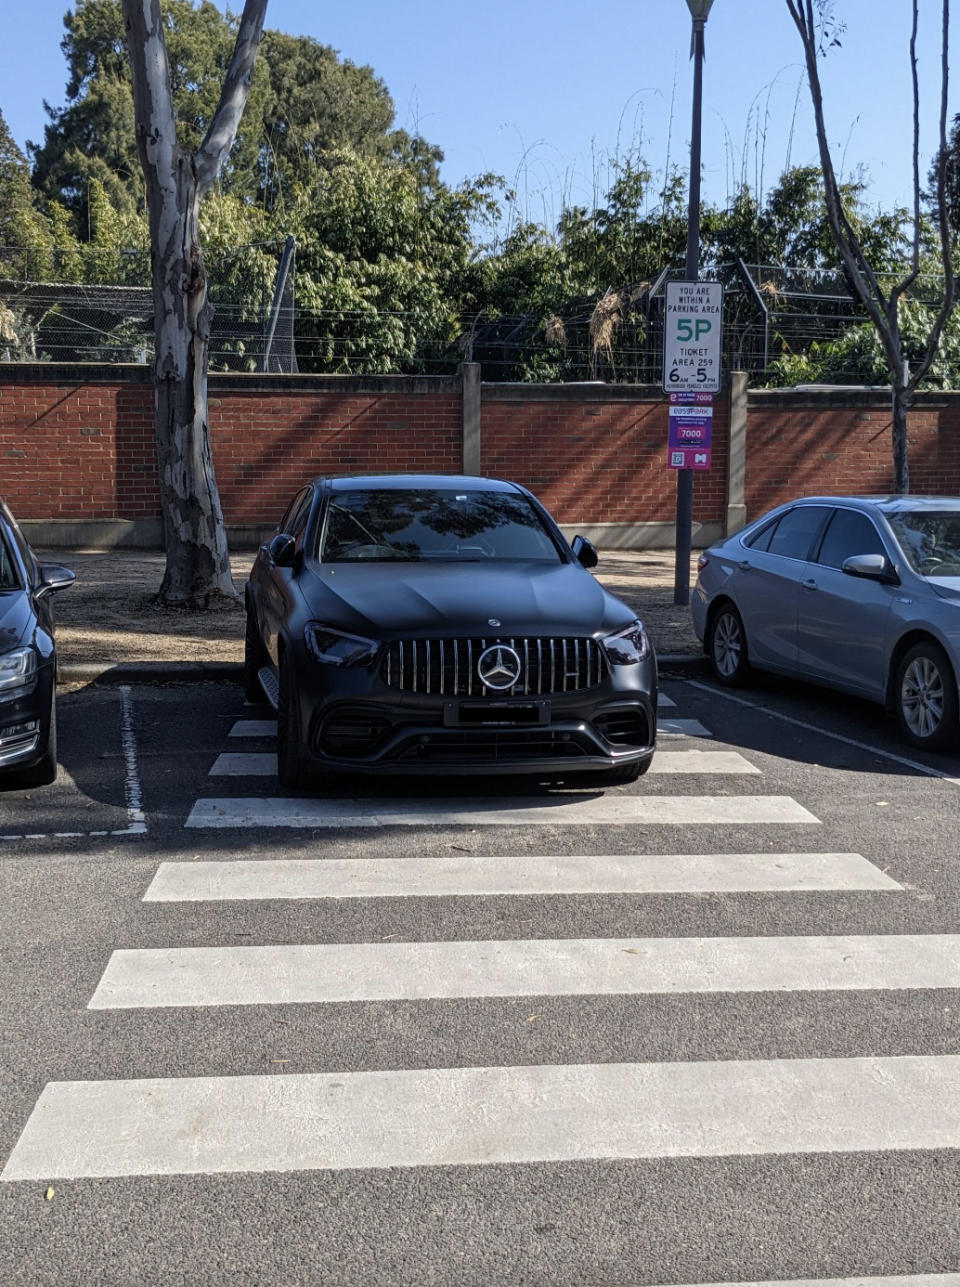 The Mercedes driver parked on the Zebra crossing at the Melbourne Zoo.